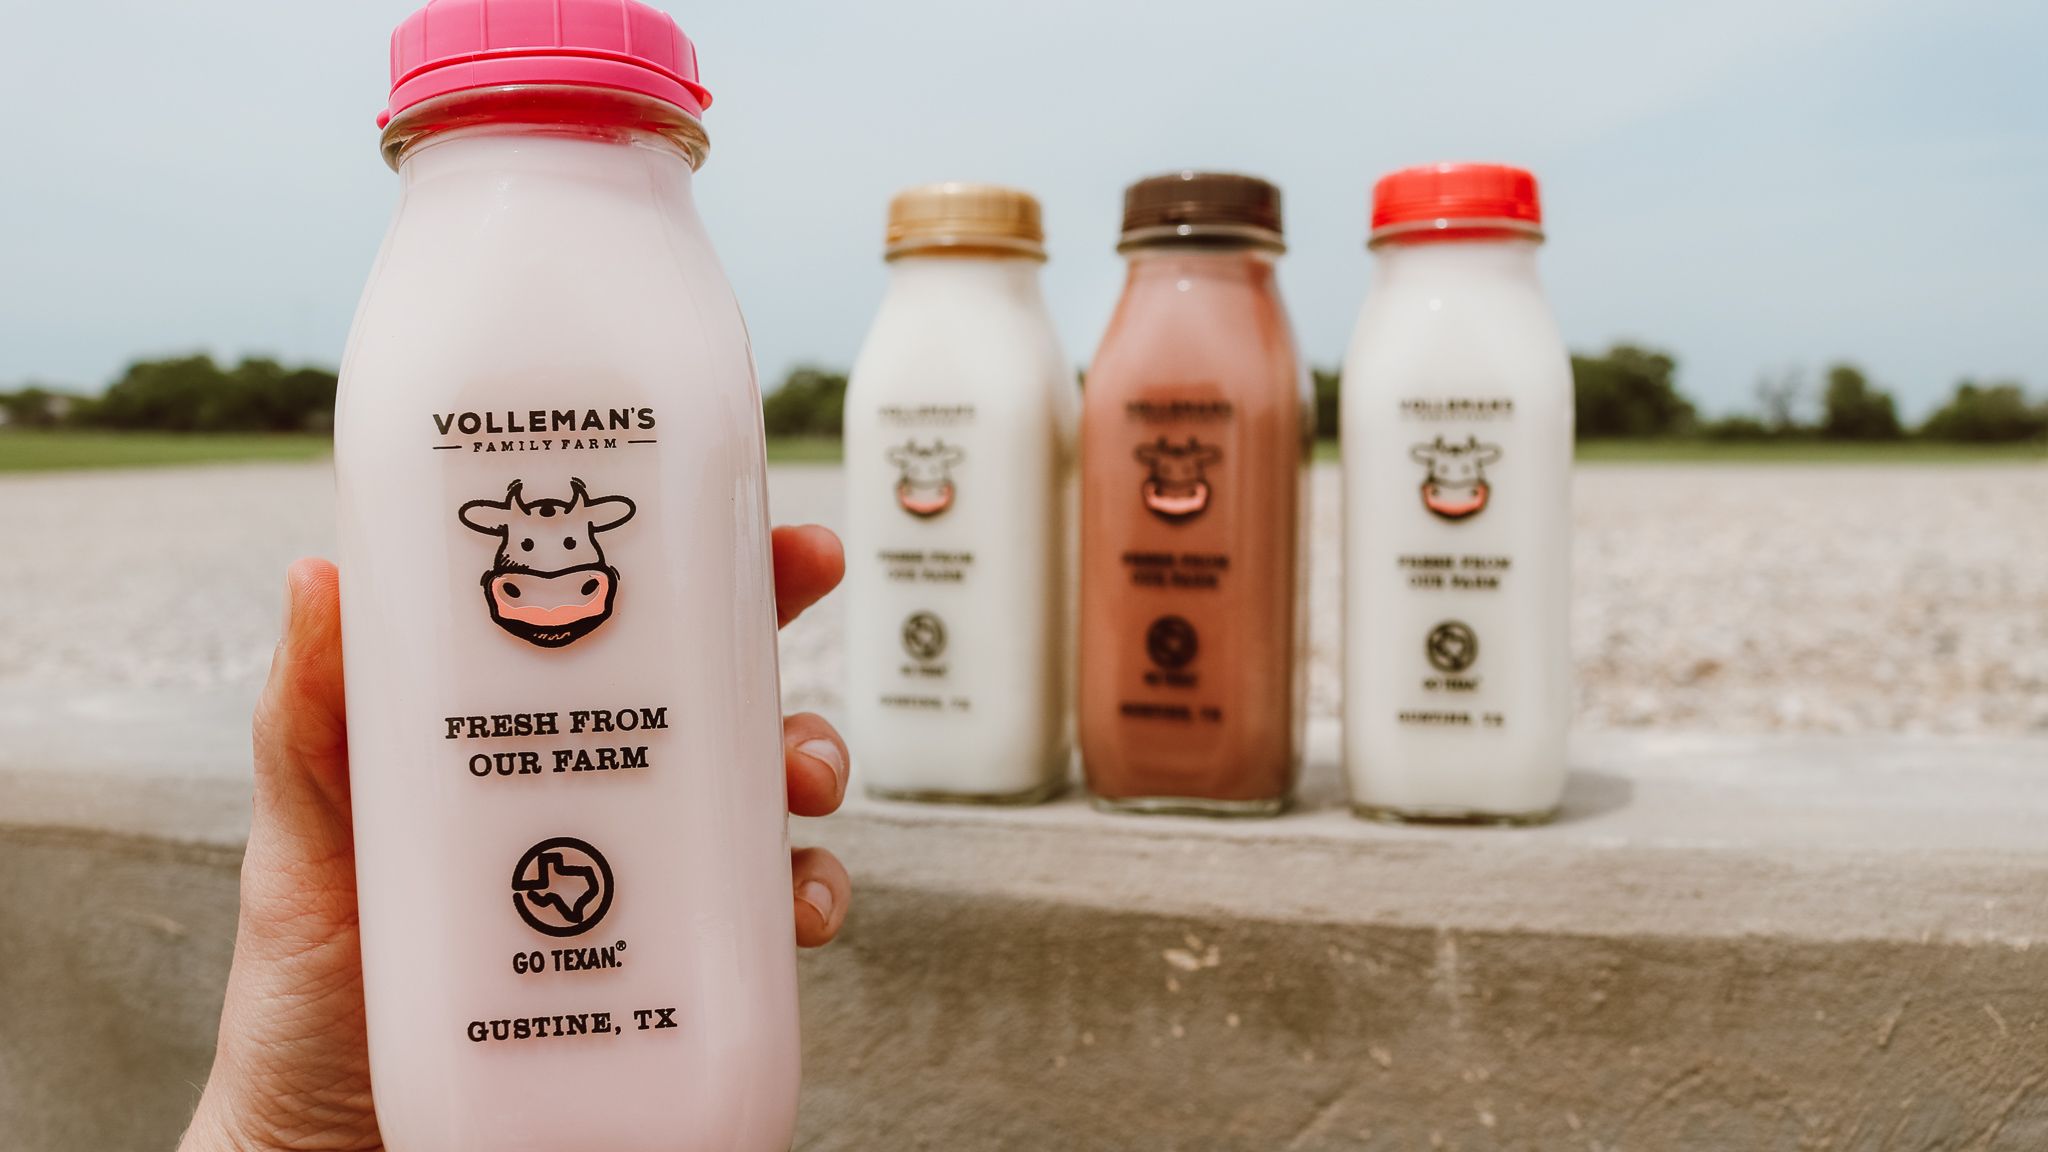 Volleman's Family Farm - Milk in glass bottles from a local Texan family